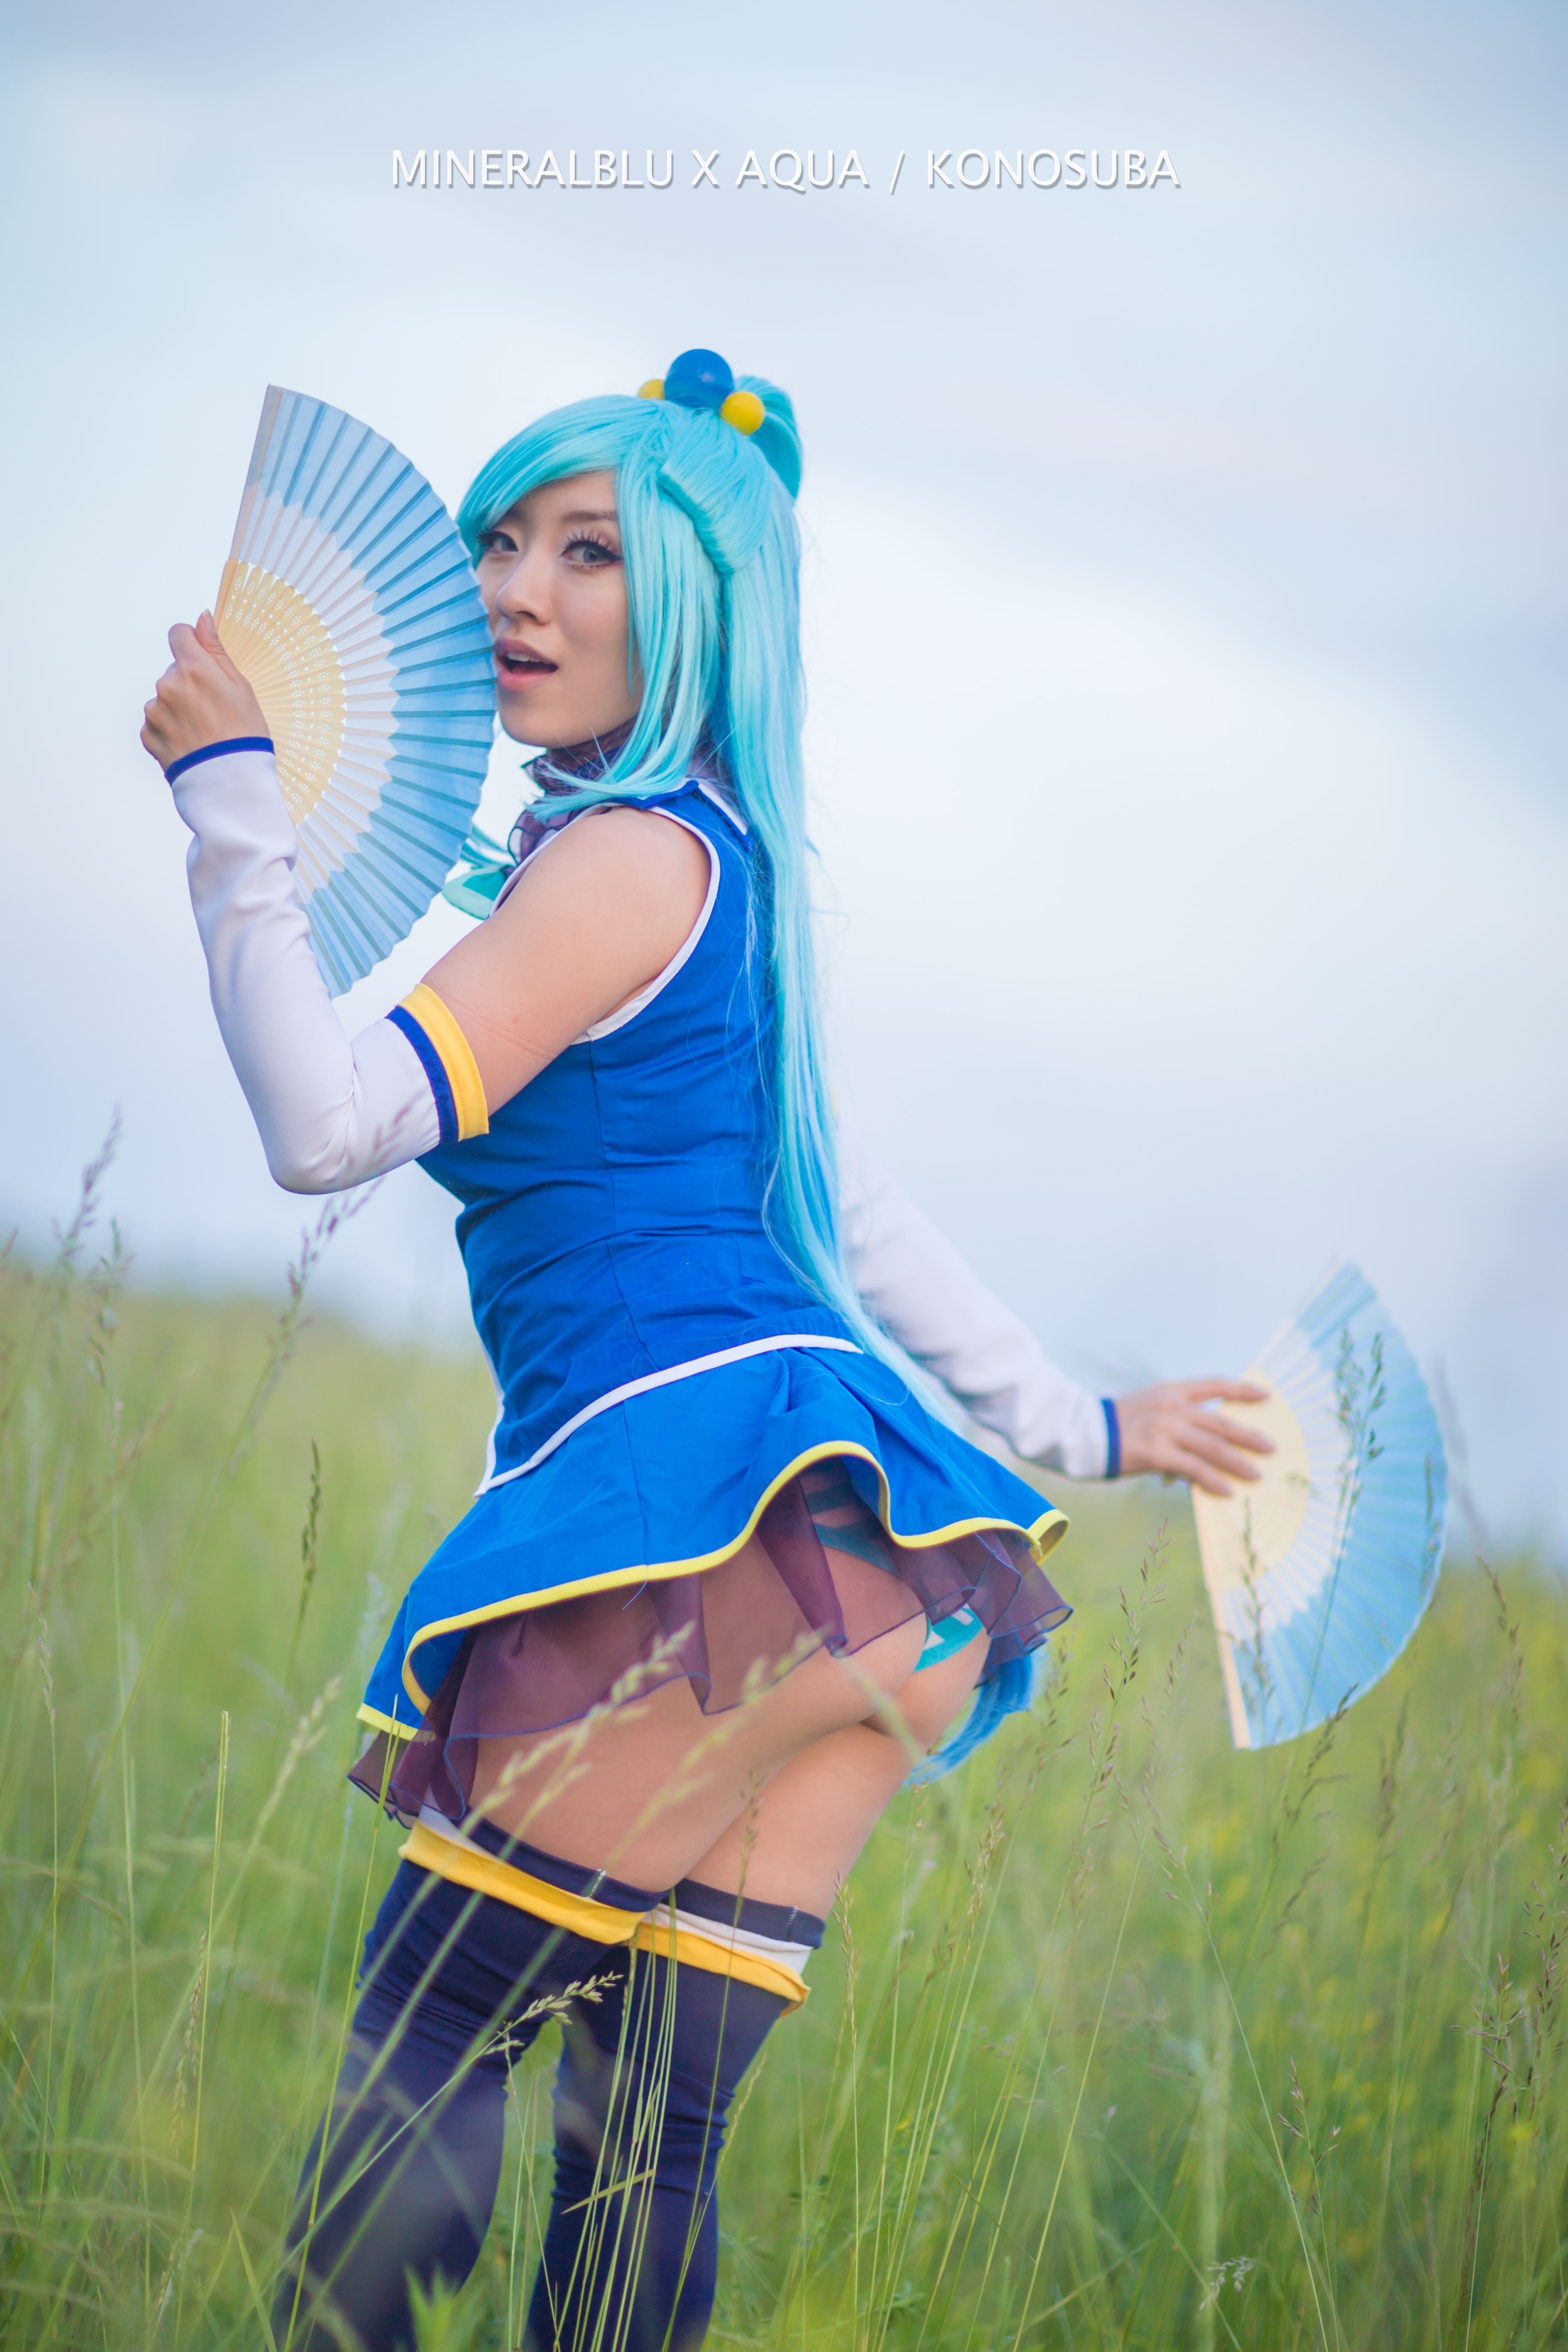 Colossalcon Cosplay Pool Party Con Coverage Presented by Kotaku, Mineralblu...